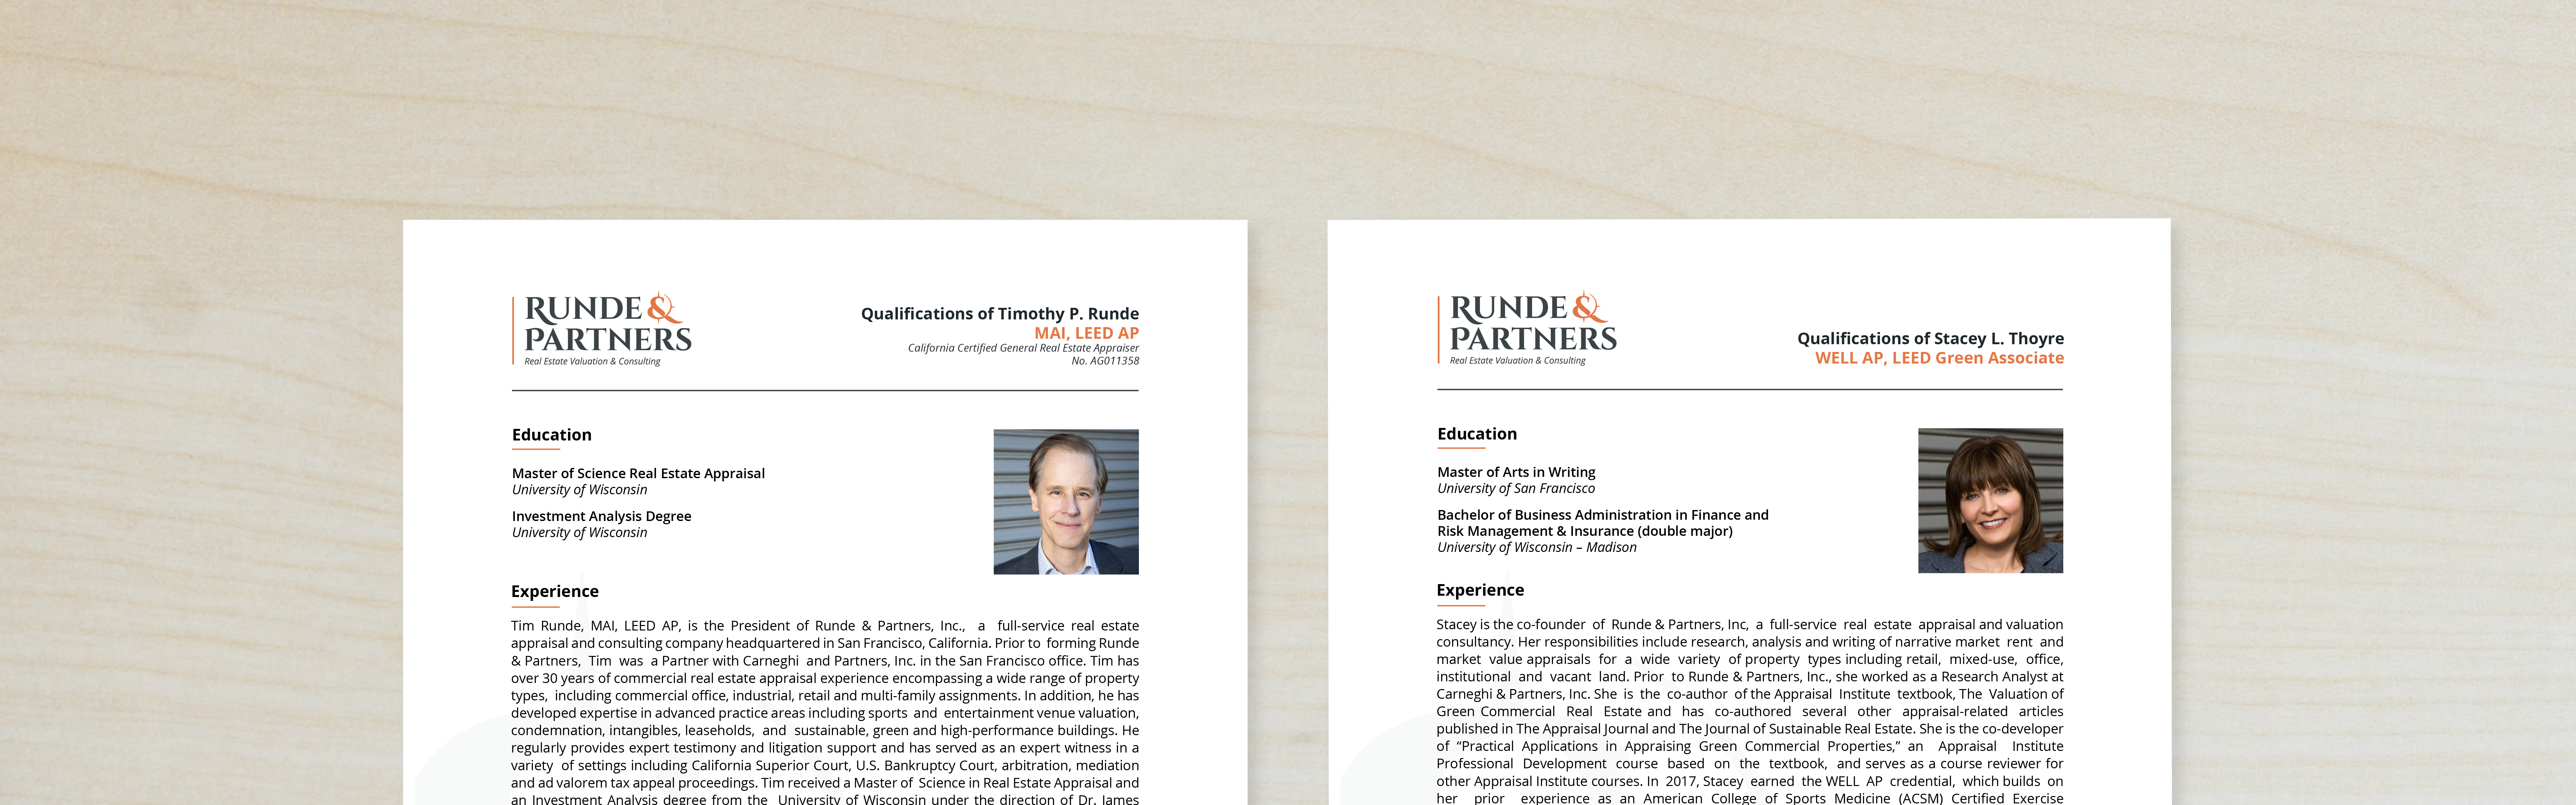 Two professional business cards displayed side by side for individuals named Timothy Runde and Stacey Thoyre from the firm Runde & Partners, detailing their qualifications and contact information, each card featuring a head